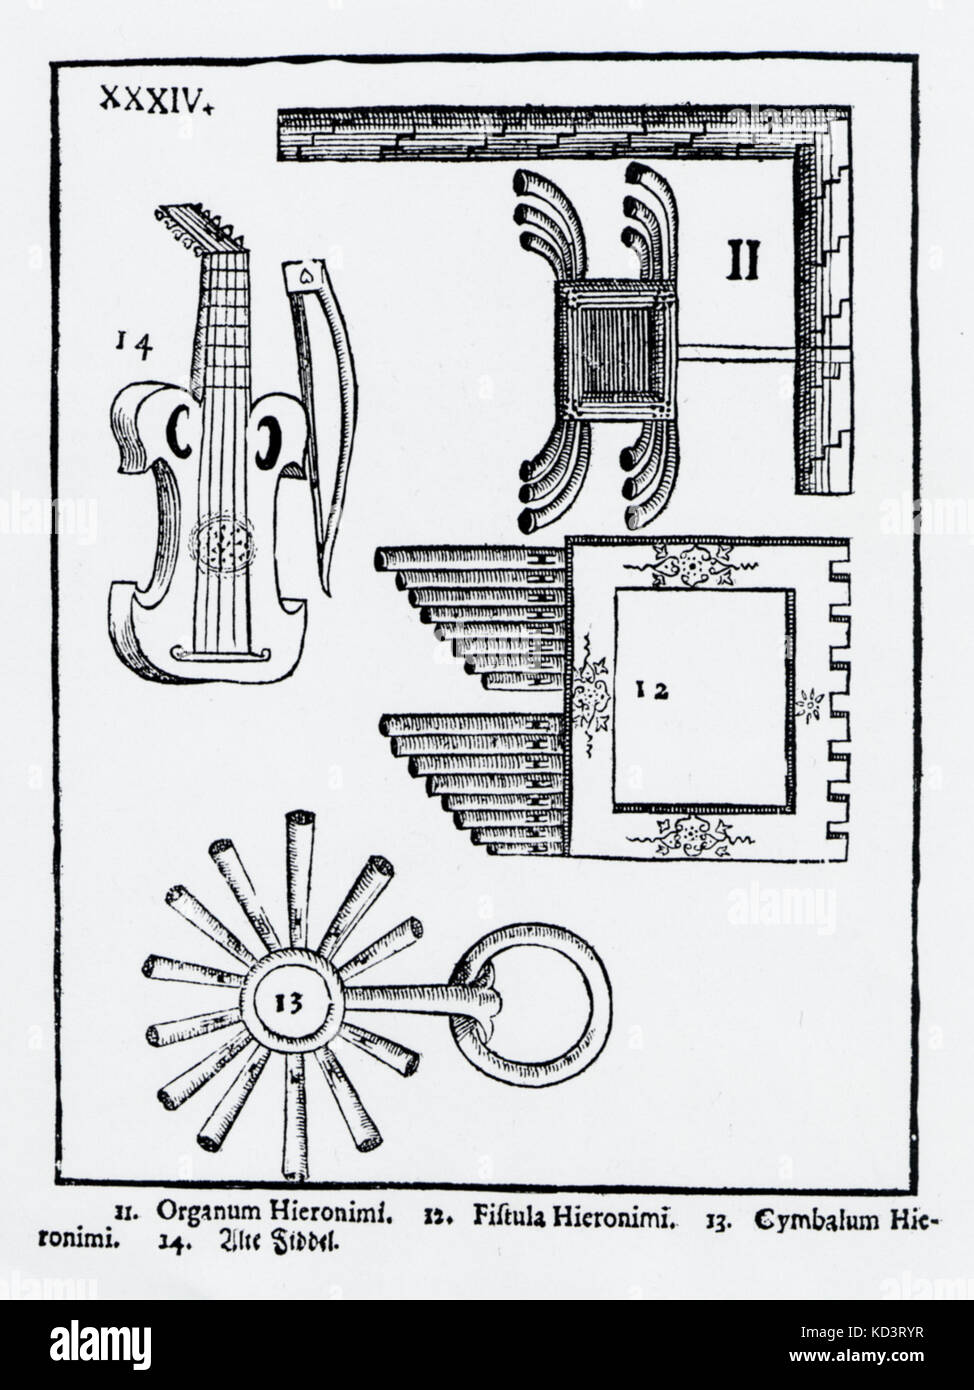 Plate XXXIV from Praetorius's 'Syntagma Musicum' showing: 11. Tuning device 12. Tuning pipes 13. Tuning chimes 14. Old 'Fiddel'.  Dated 1619.  16th century Renaissance, 17th century early Baroque.  Praetorius: German composer and musicologist of sacred and profane music, 18 February 1571 - 15 February 1621. Stock Photo